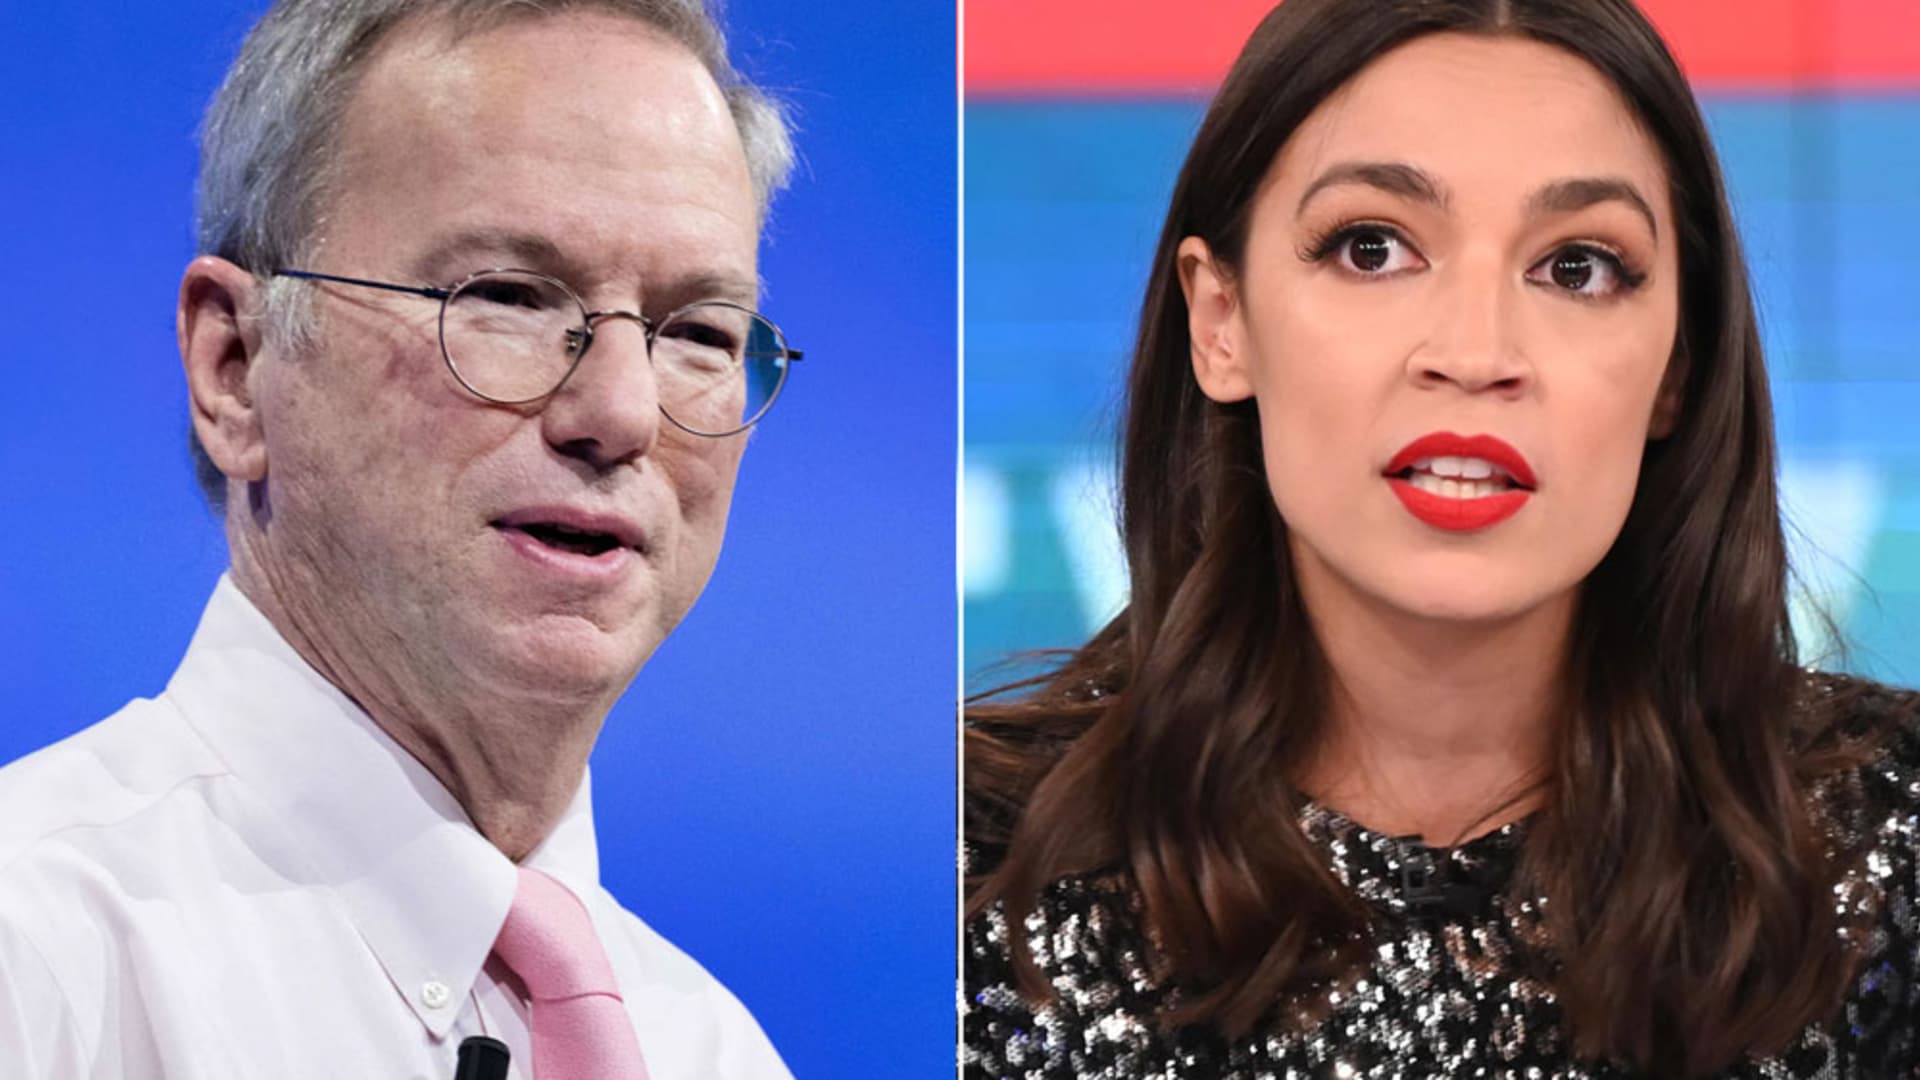 Google billionaire Eric Schmidt on AOC's claim billionaires are a policy failure: She doesn't see the situation clearly